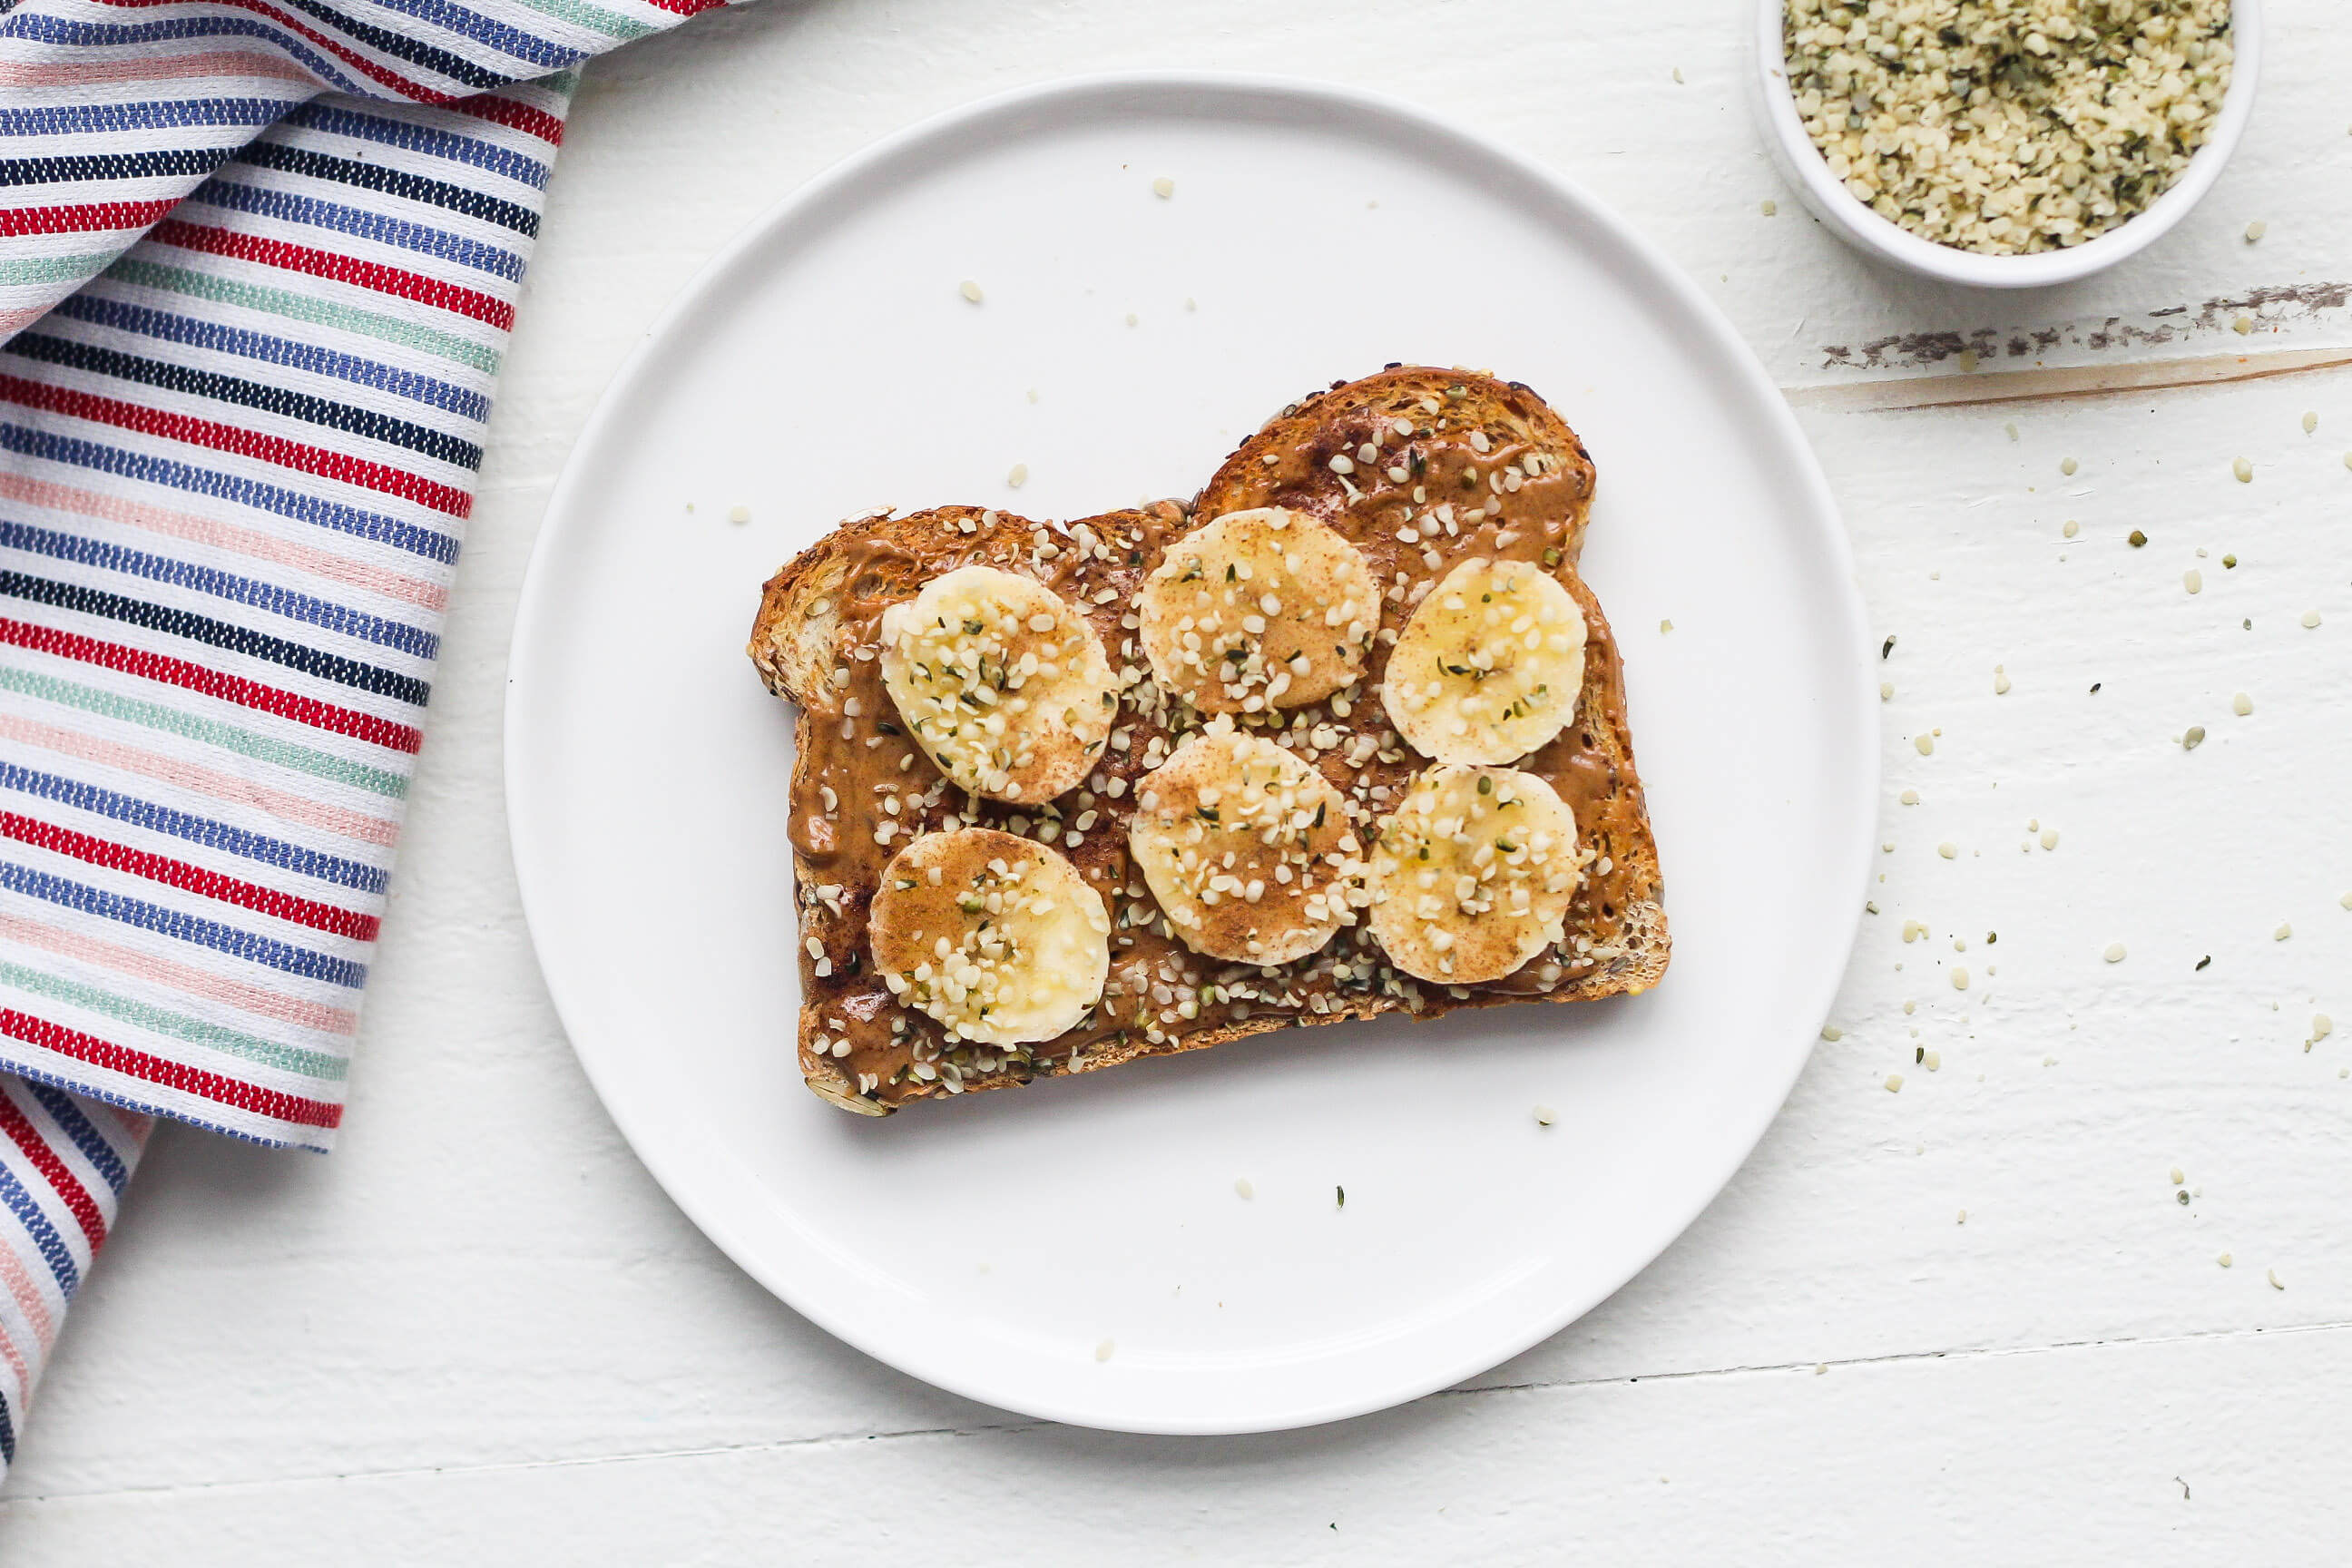 20 Meal Ideas to Support Student-Athletes: Toast with Nut Butter, Banana & Hemp Seeds